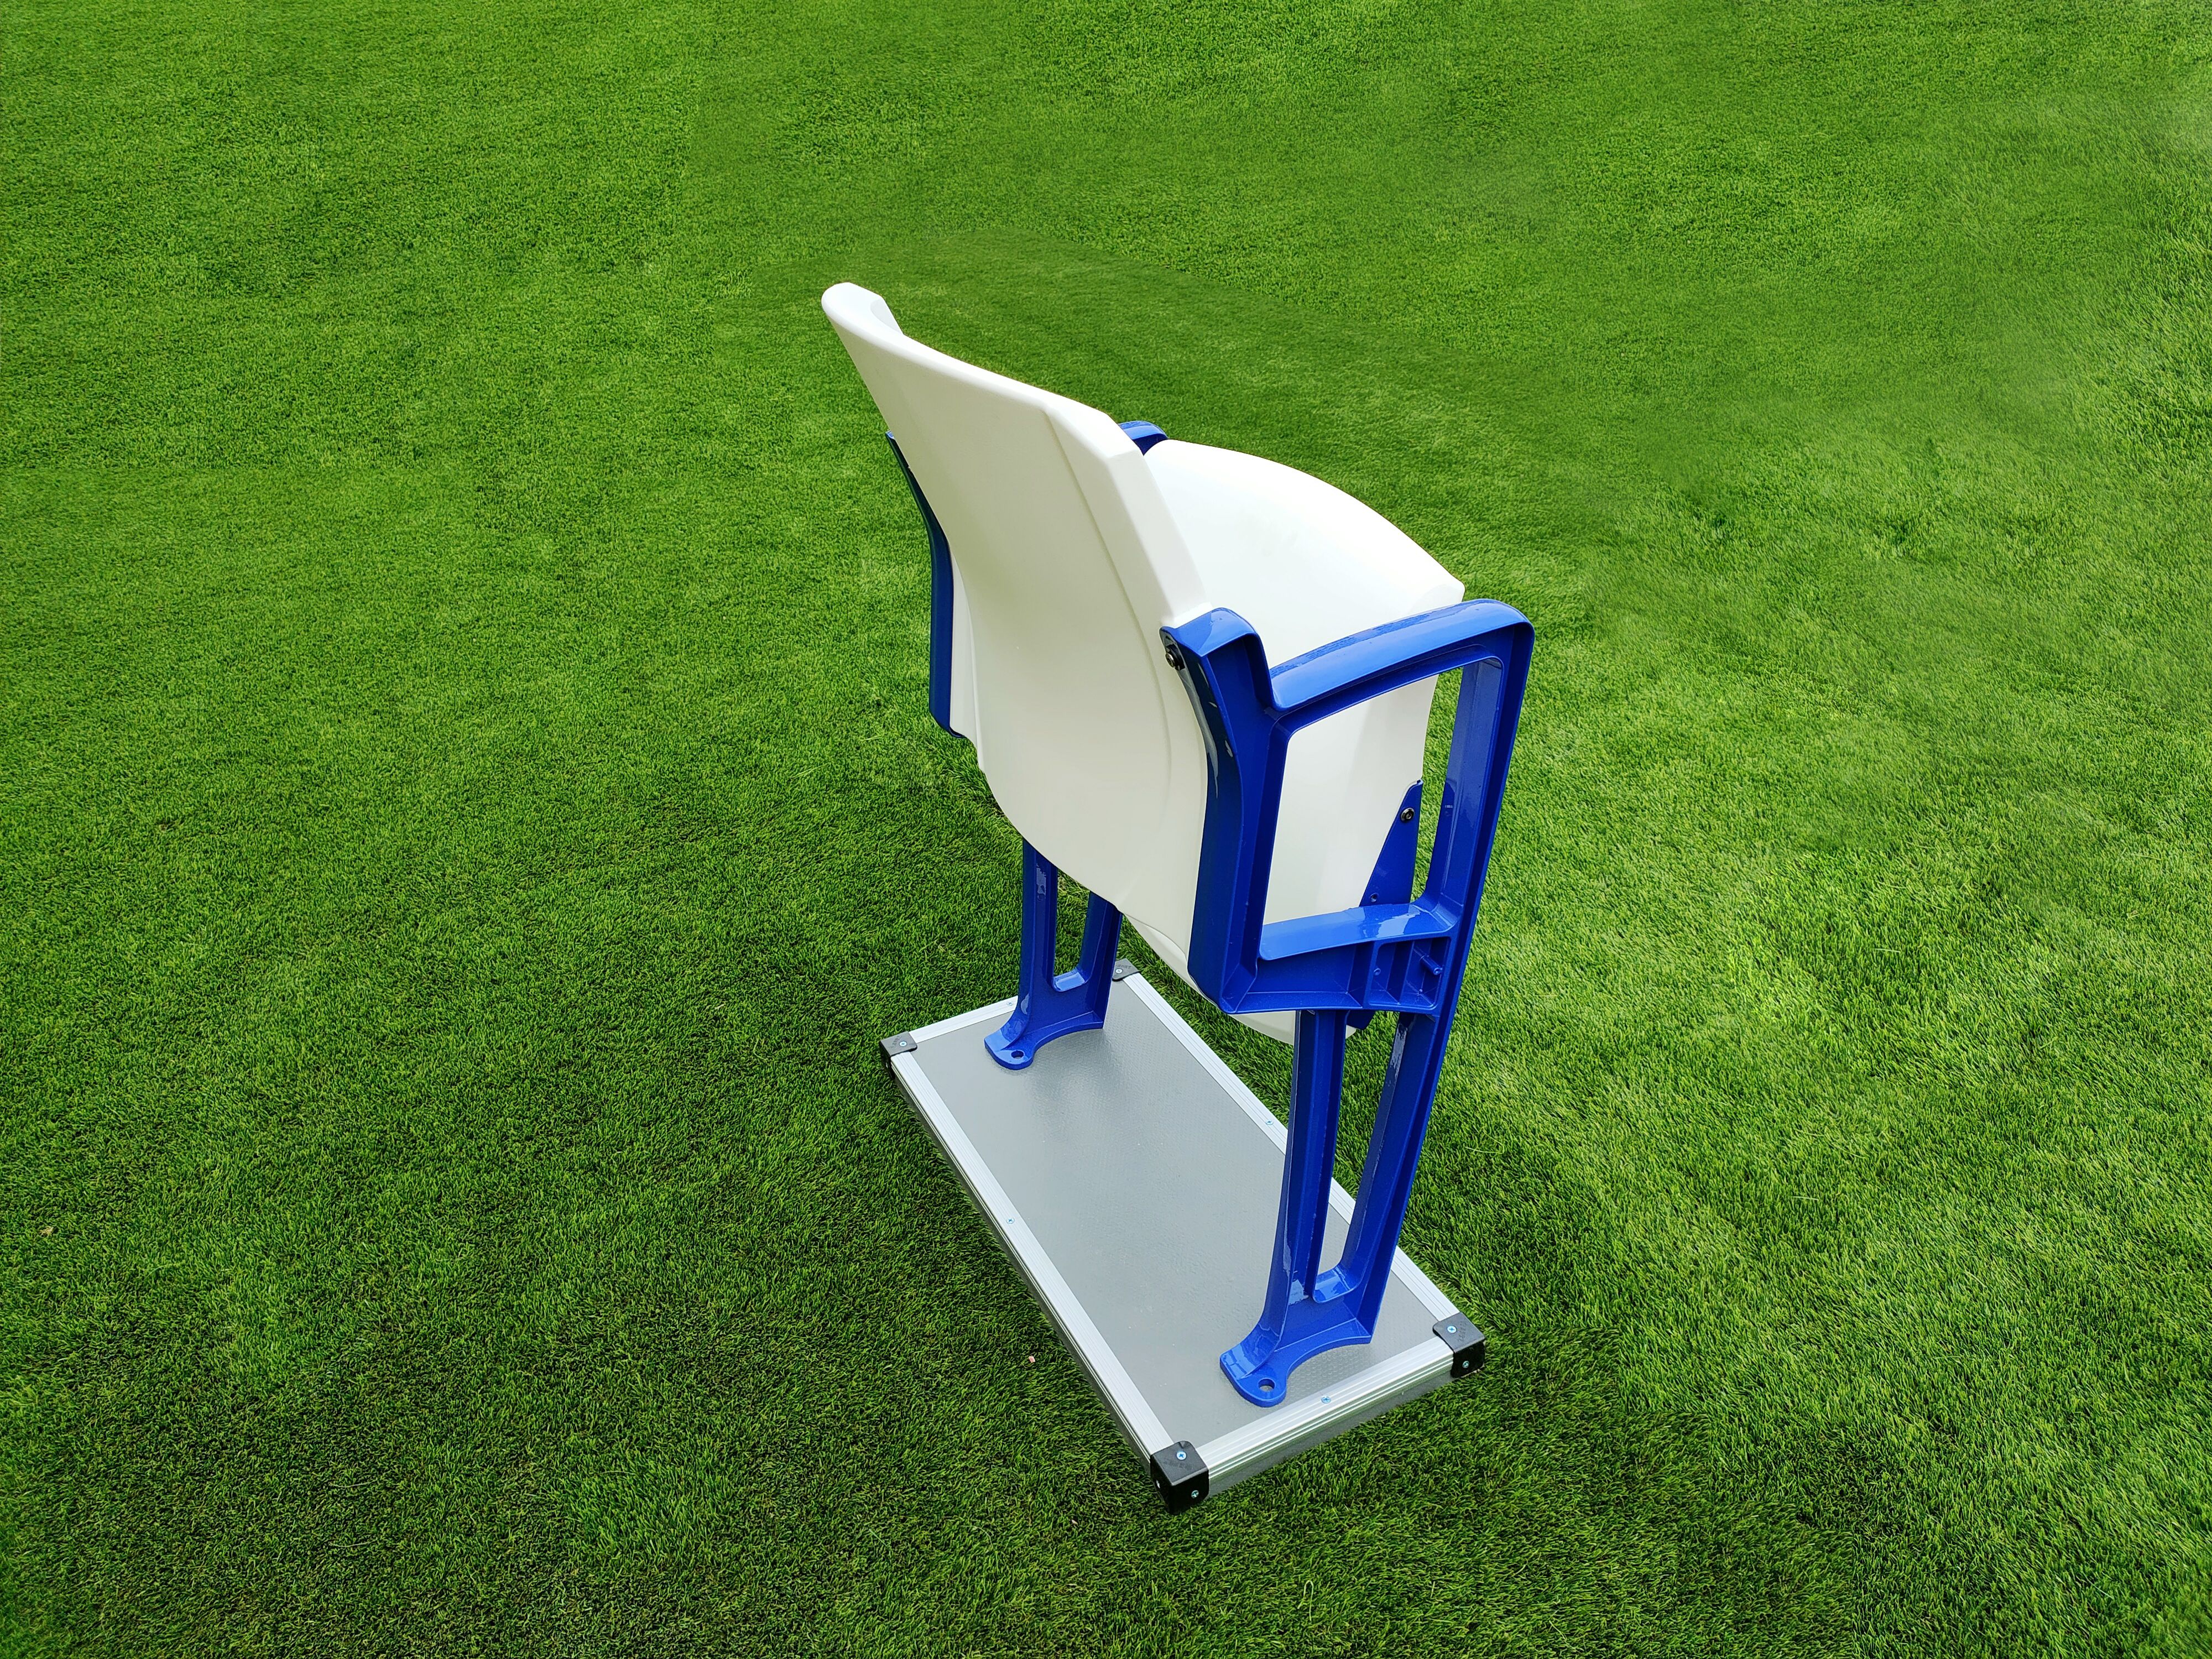 Yourease Football Stadium Seats for Vip use Featured Image